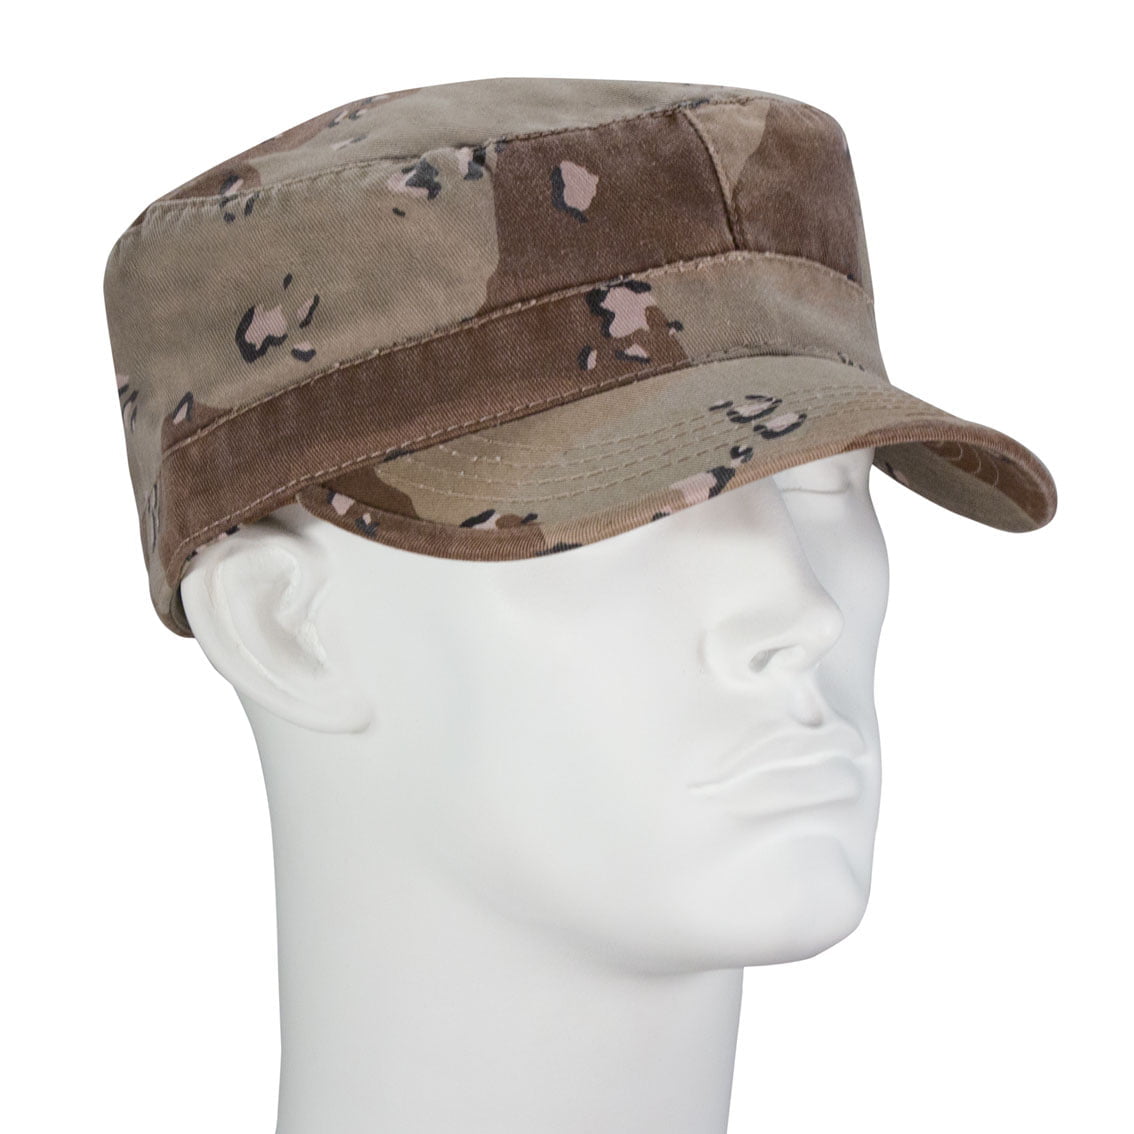 12pcs Desert Camo Castro Military Fatigue Army Hats - Fitted - Unconstructed - 100% Cotton - Bulk by the Dozen - Wholesale